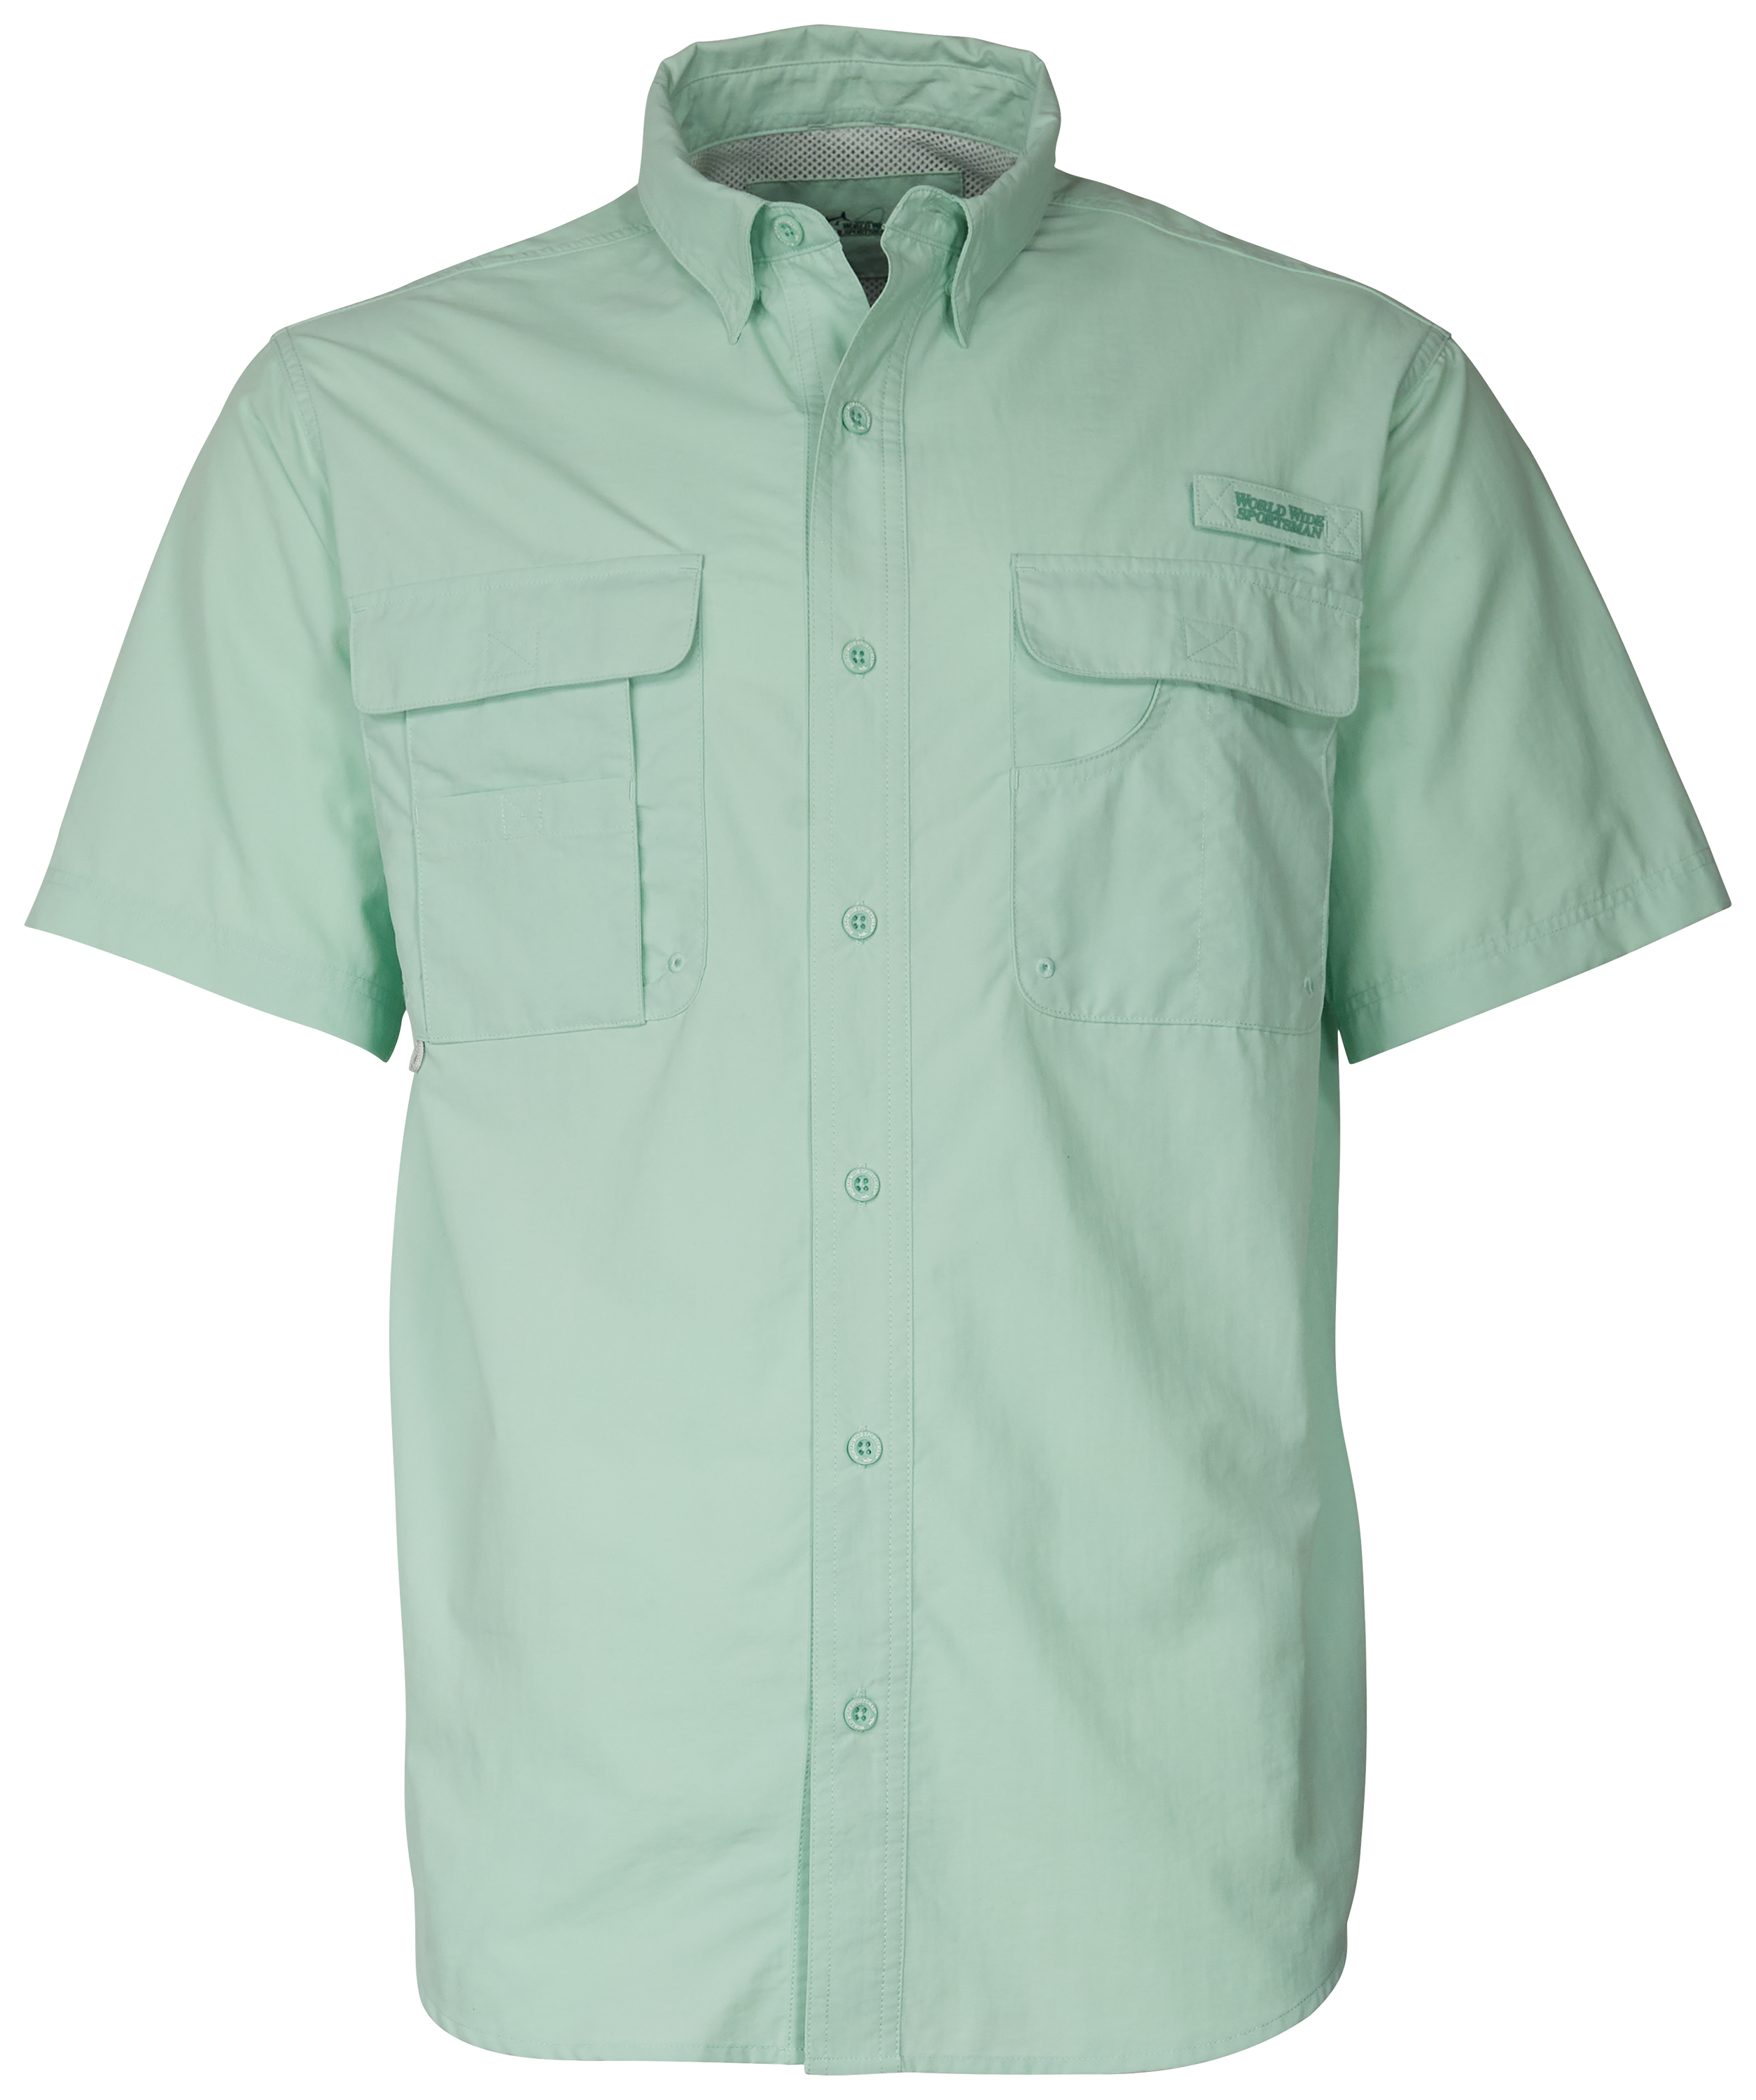 World Wide Sportsman Recycled-Nylon Angler 2.0 Short-Sleeve Button-Down Shirt for Men - Lichen - S